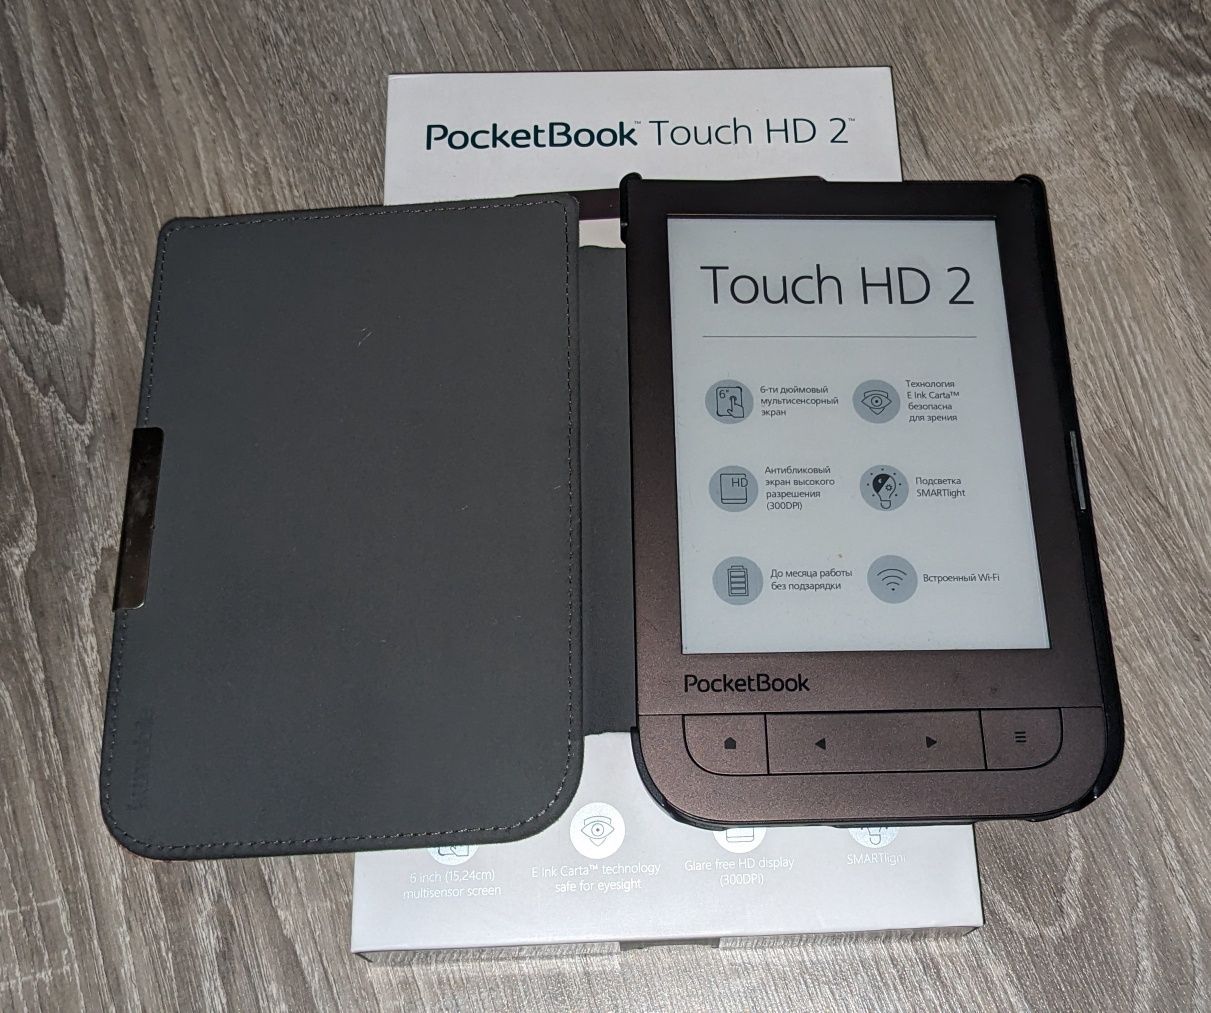 Pocketbook 631 touch hd 2